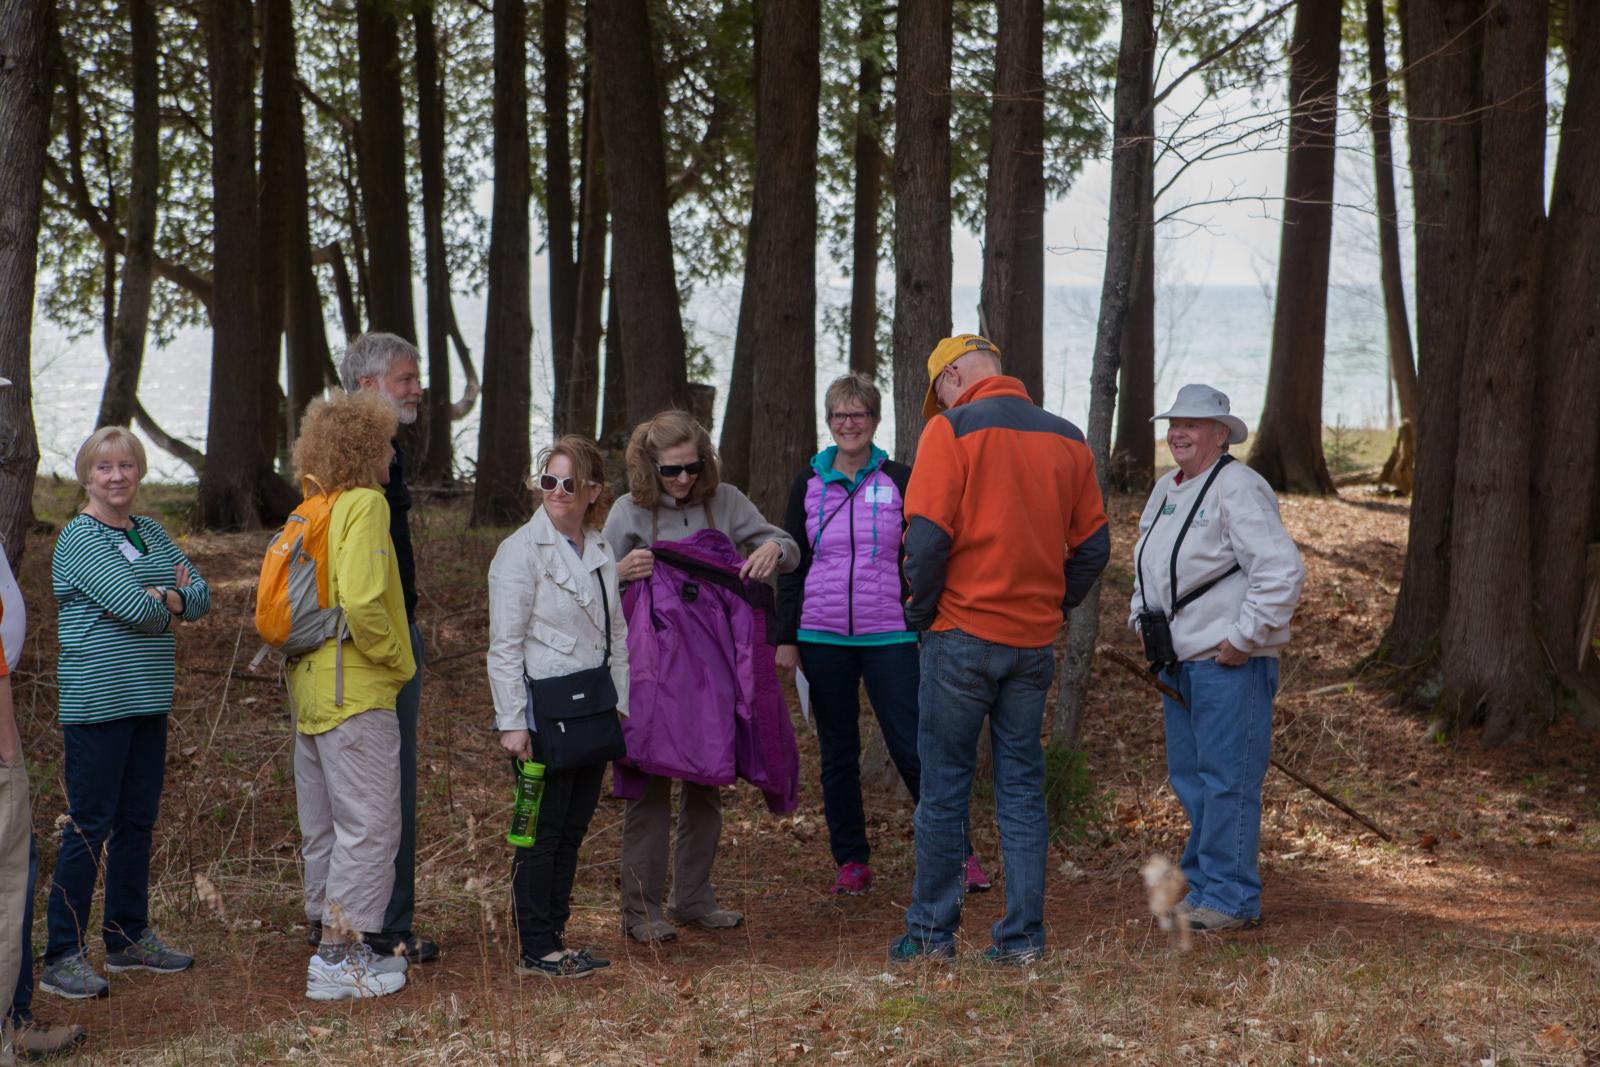 a group of hikers on a wooded trail by a lake